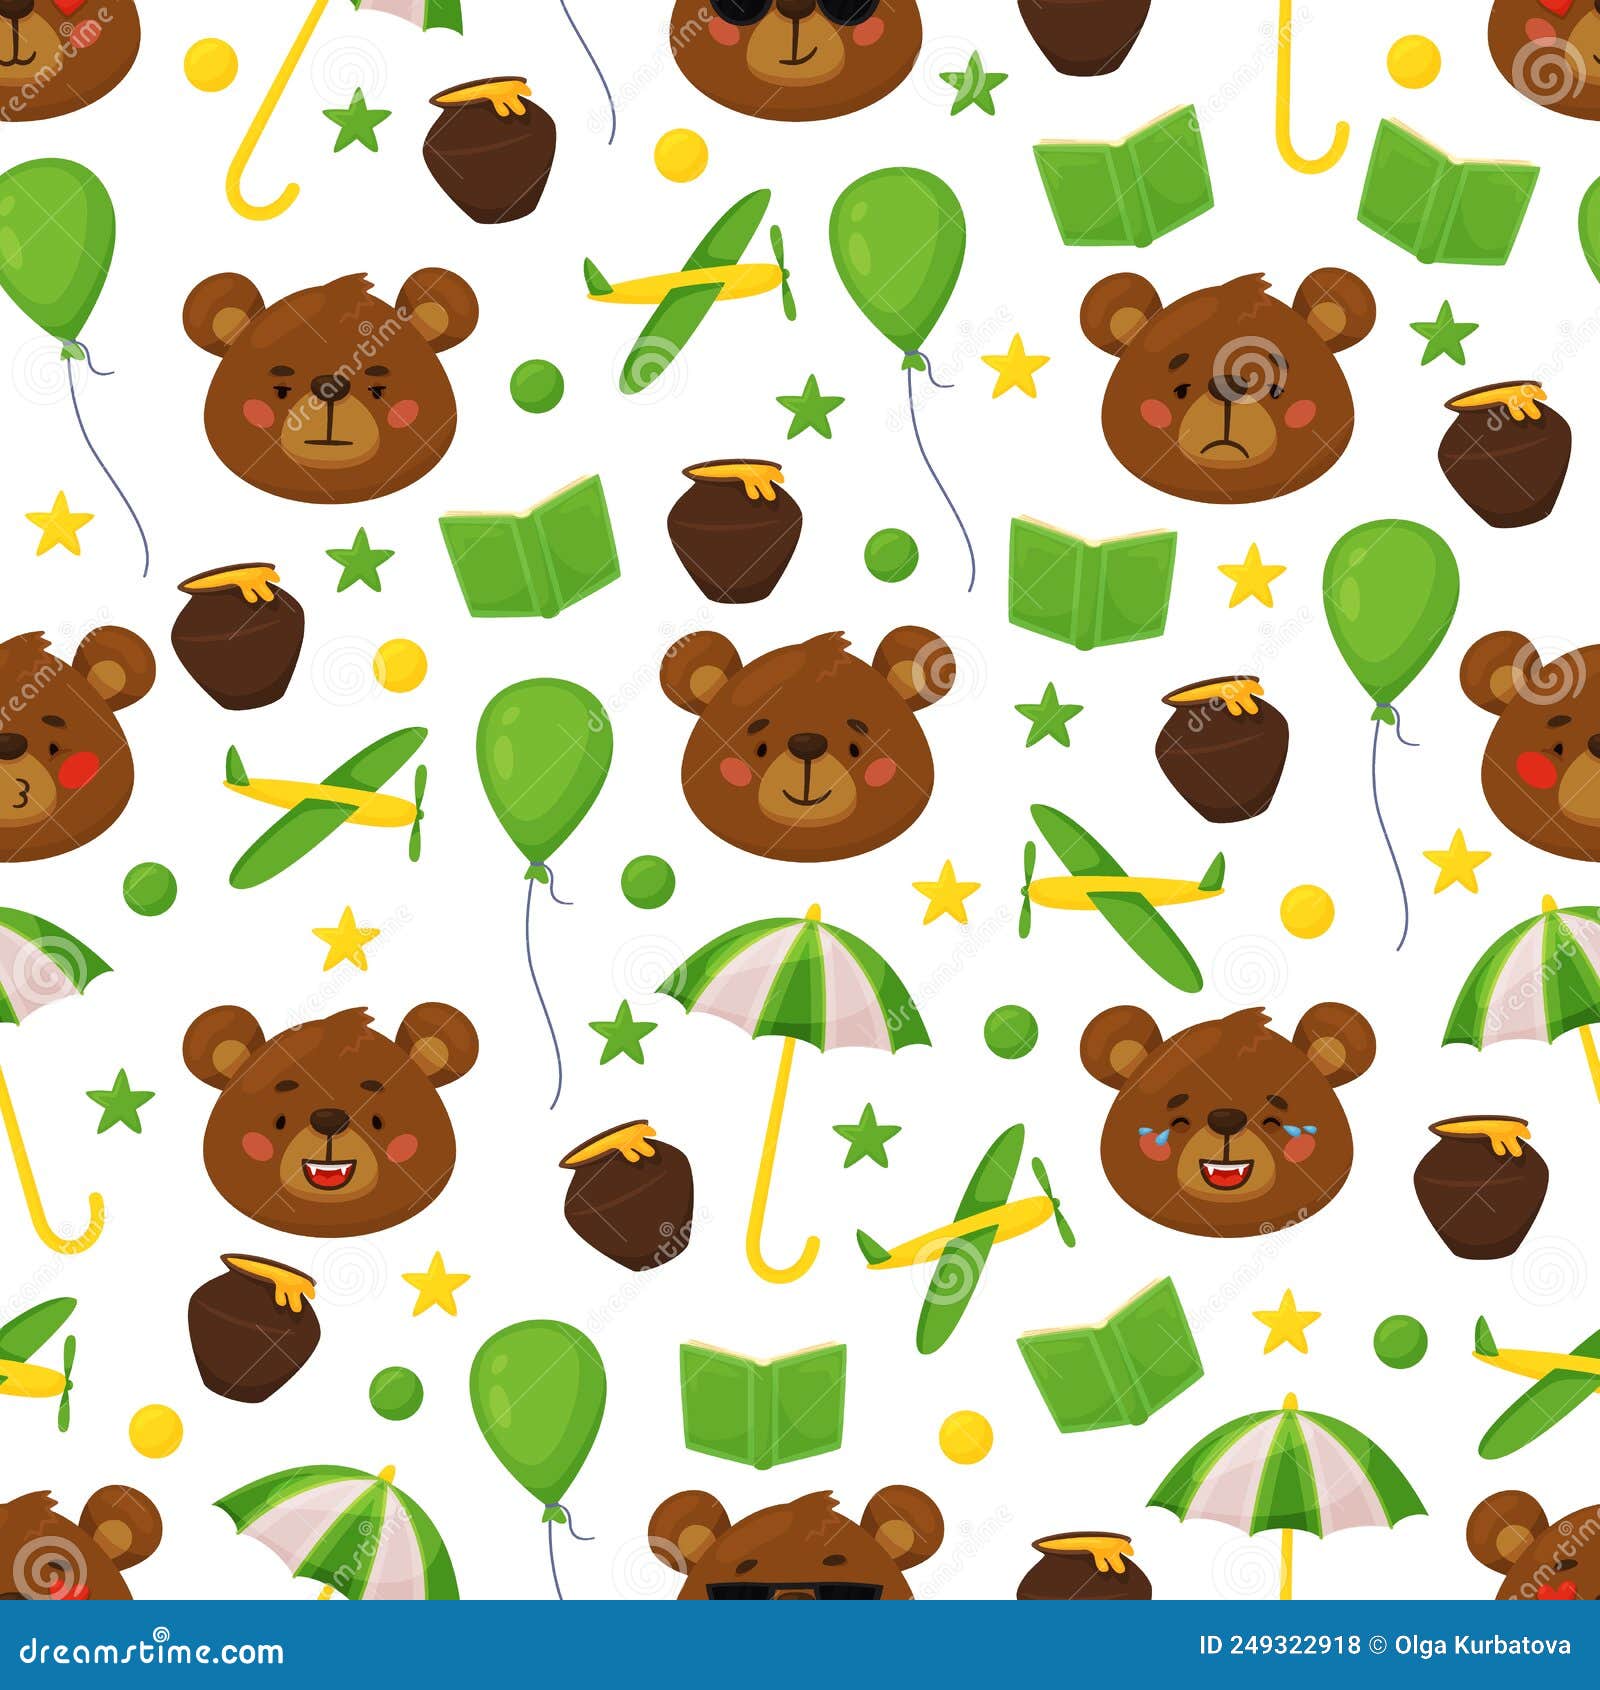 cartoon bear seamless pattern. funny animals heads, brown grizzly characters, forest mammals faces and objects, recent